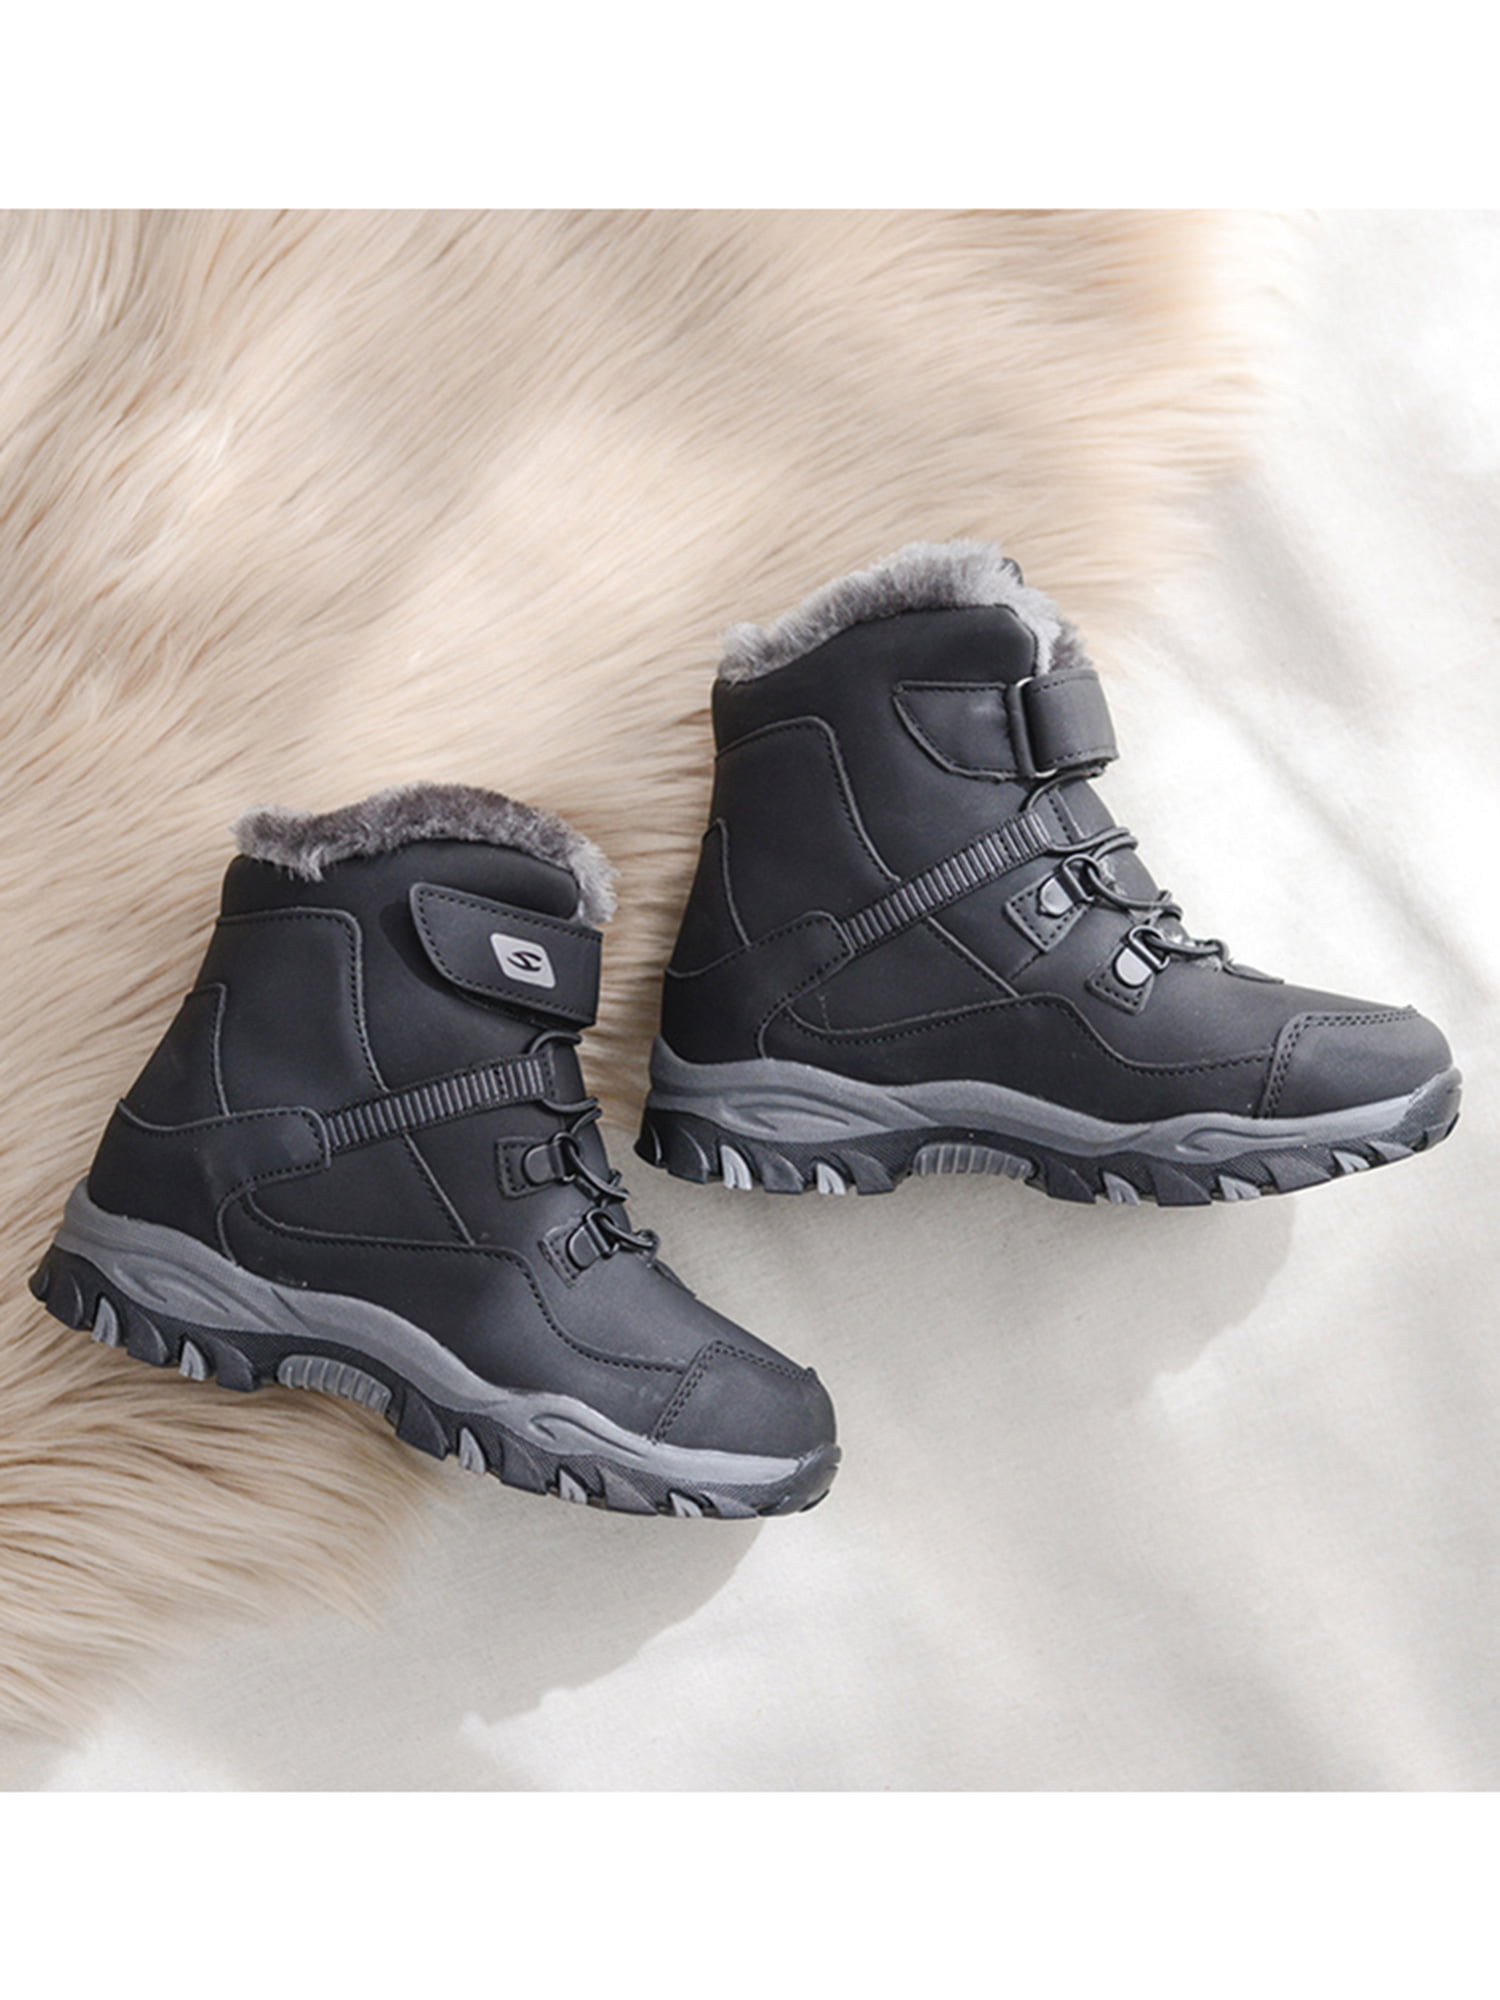 fashionable winter shoes